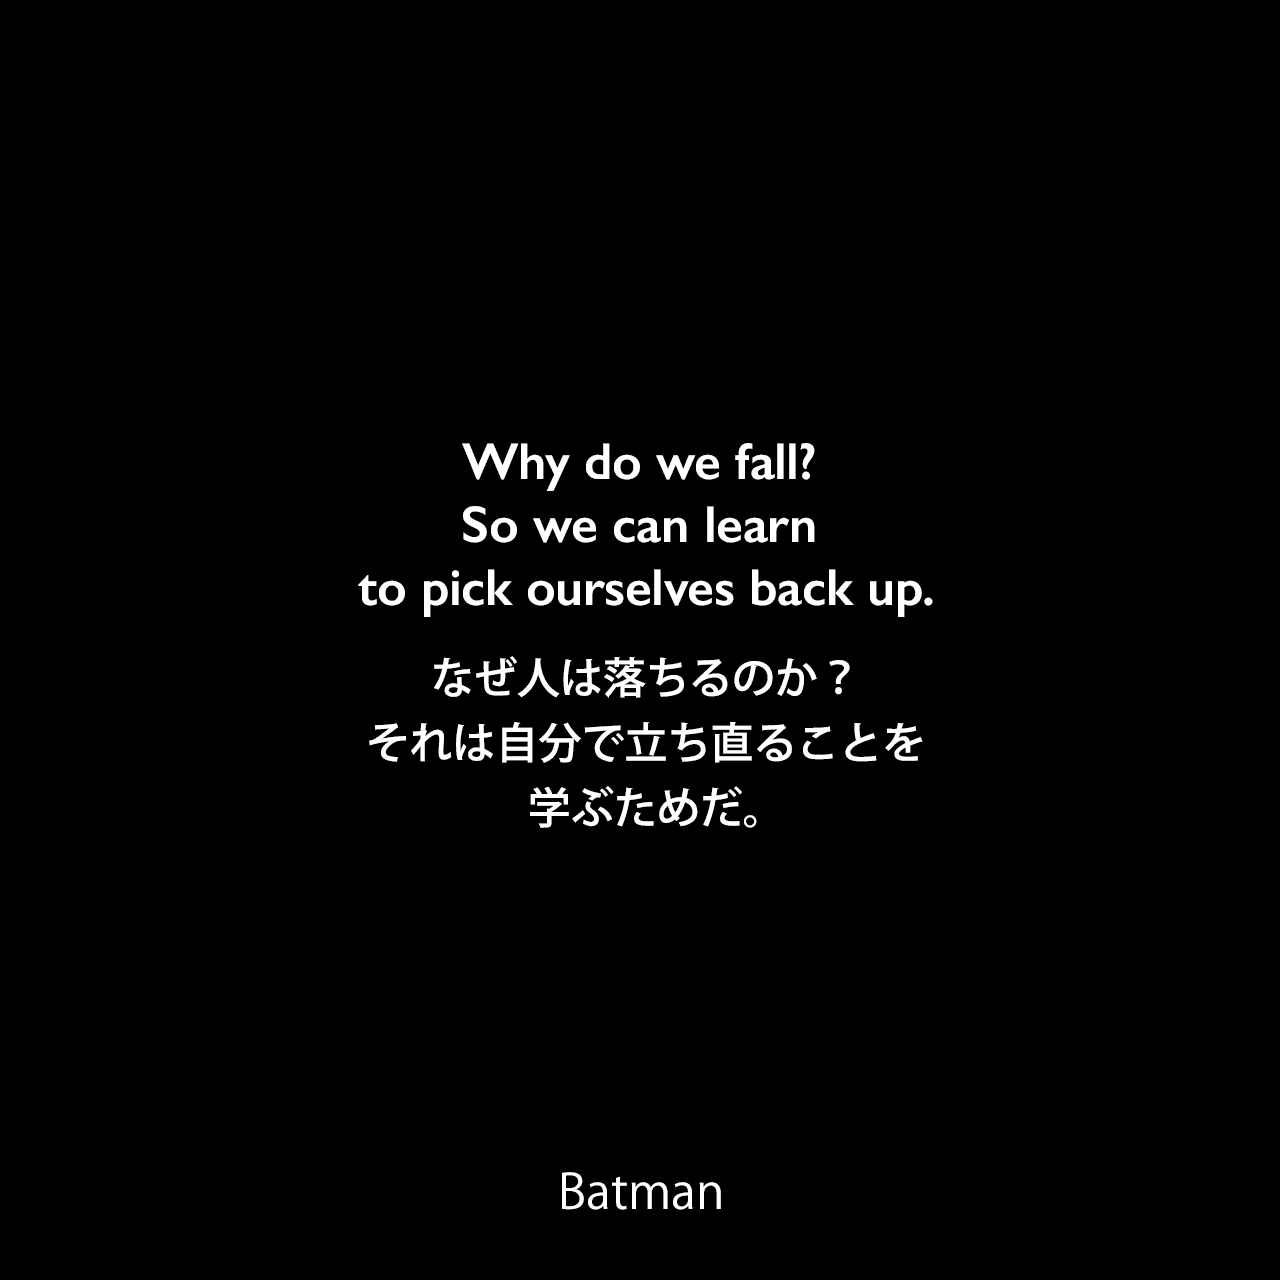 Why do we fall? So we can learn to pick ourselves back up.なぜ人は落ちるのか？それは自分で立ち直ることを学ぶためだ。（ブルースの父トーマスの言葉）- Alfred 